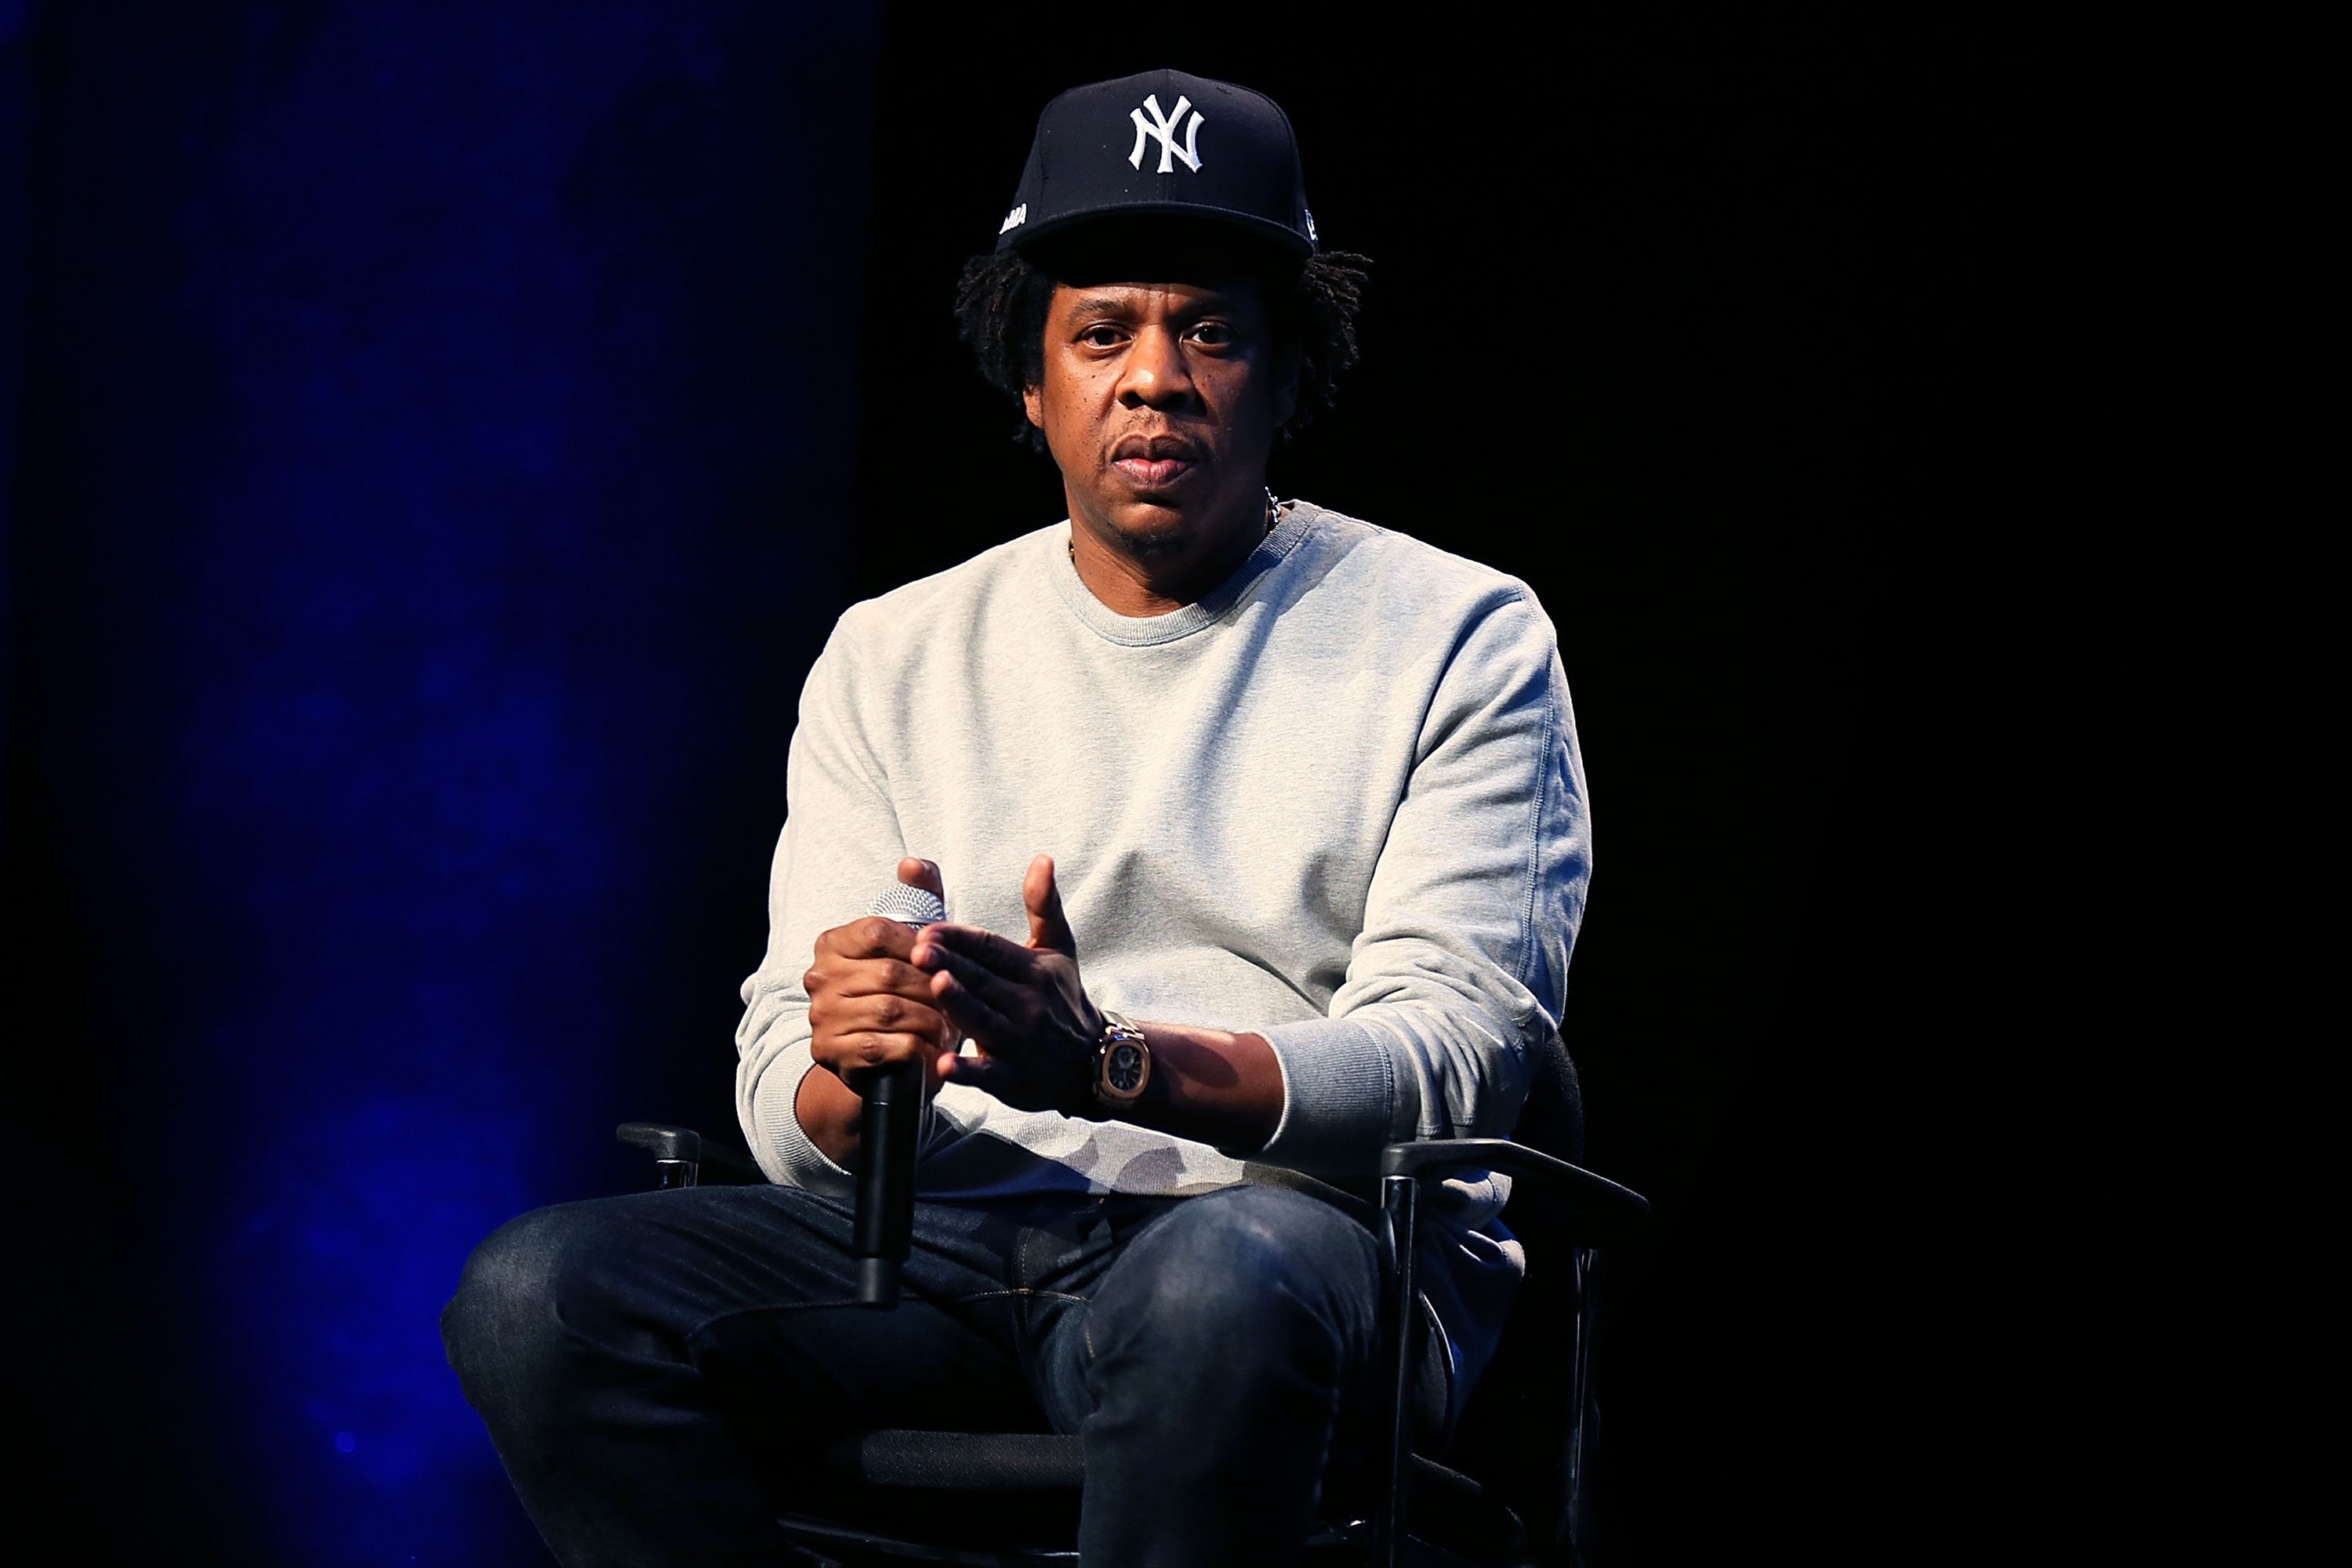 Jay-Z attends Criminal Justice Reform Organization Launch on Jan. 23, 2019 in New York City | Photo: Getty Images